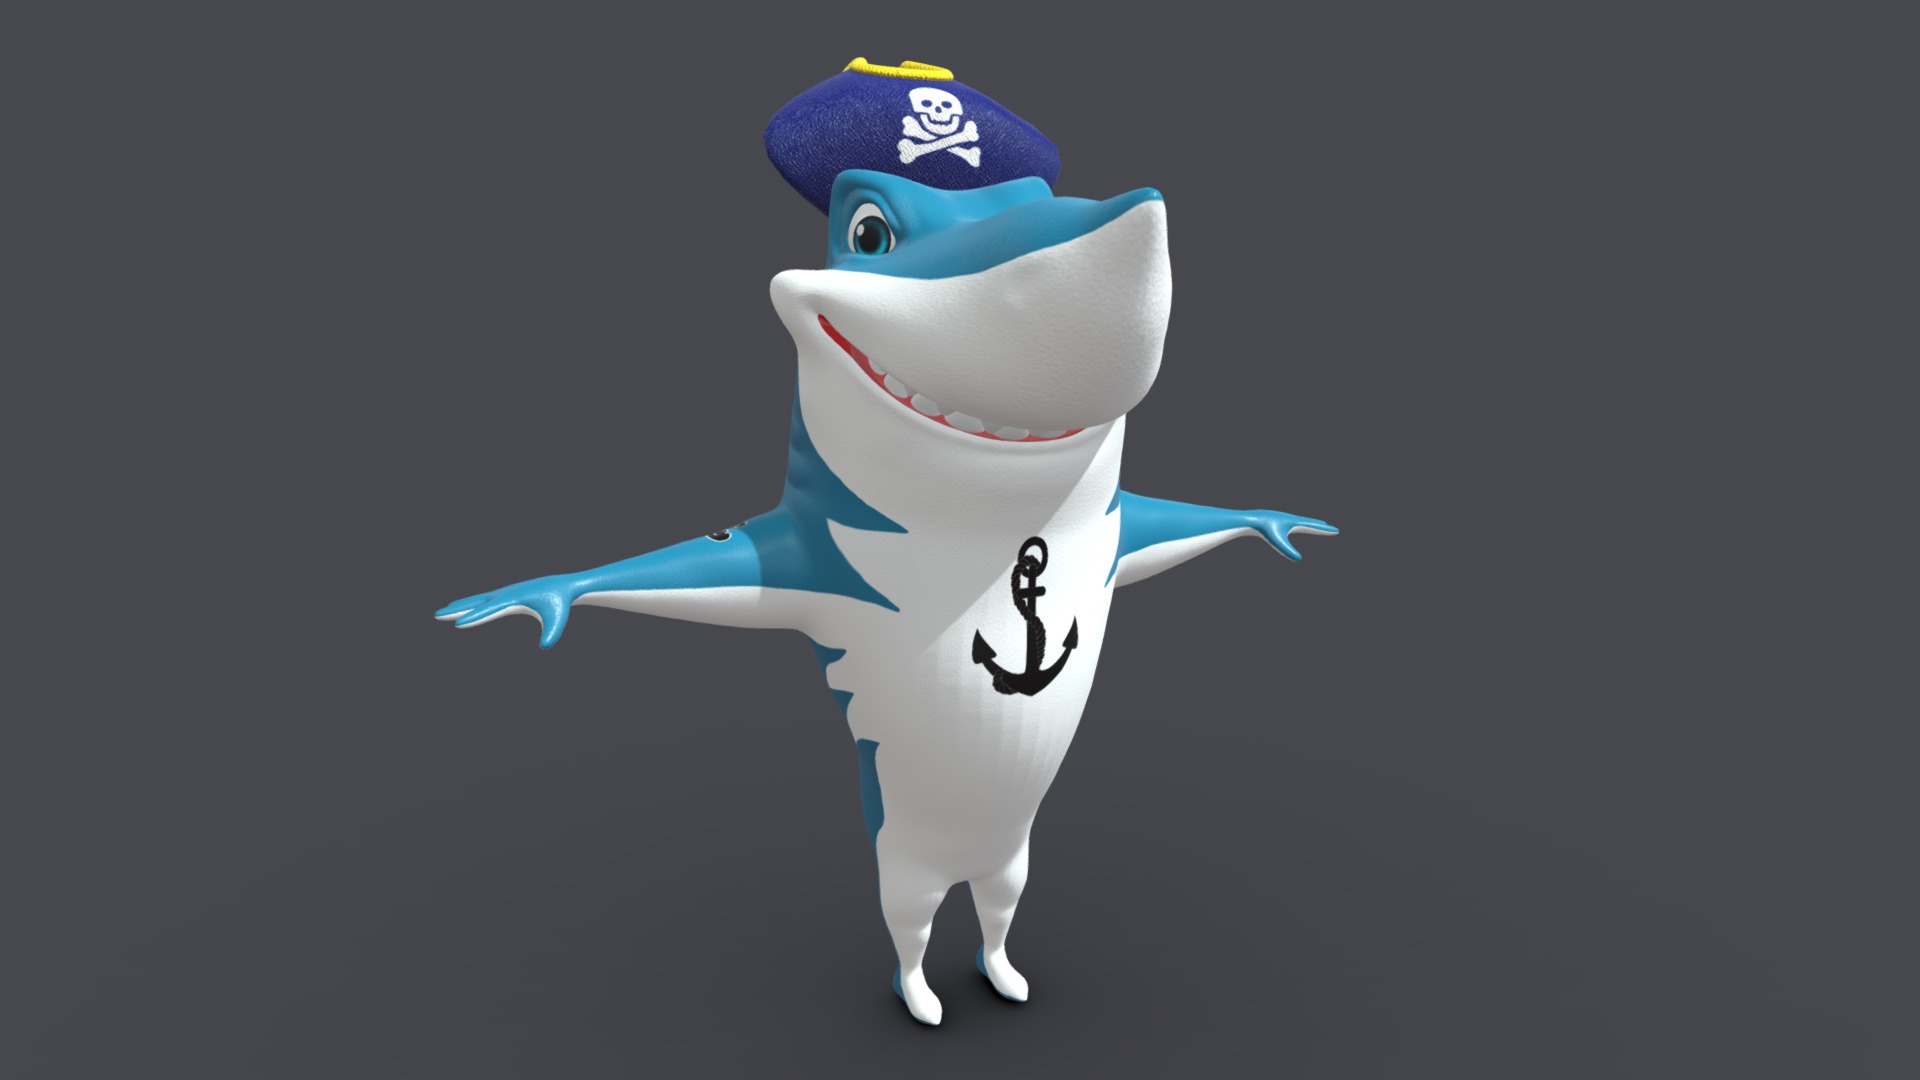 3D model Asset – Cartoons – Animal – Shark 02 – Rig – 3D - This is a 3D model of the Asset - Cartoons - Animal - Shark 02 - Rig - 3D. The 3D model is about a blue and white toy.